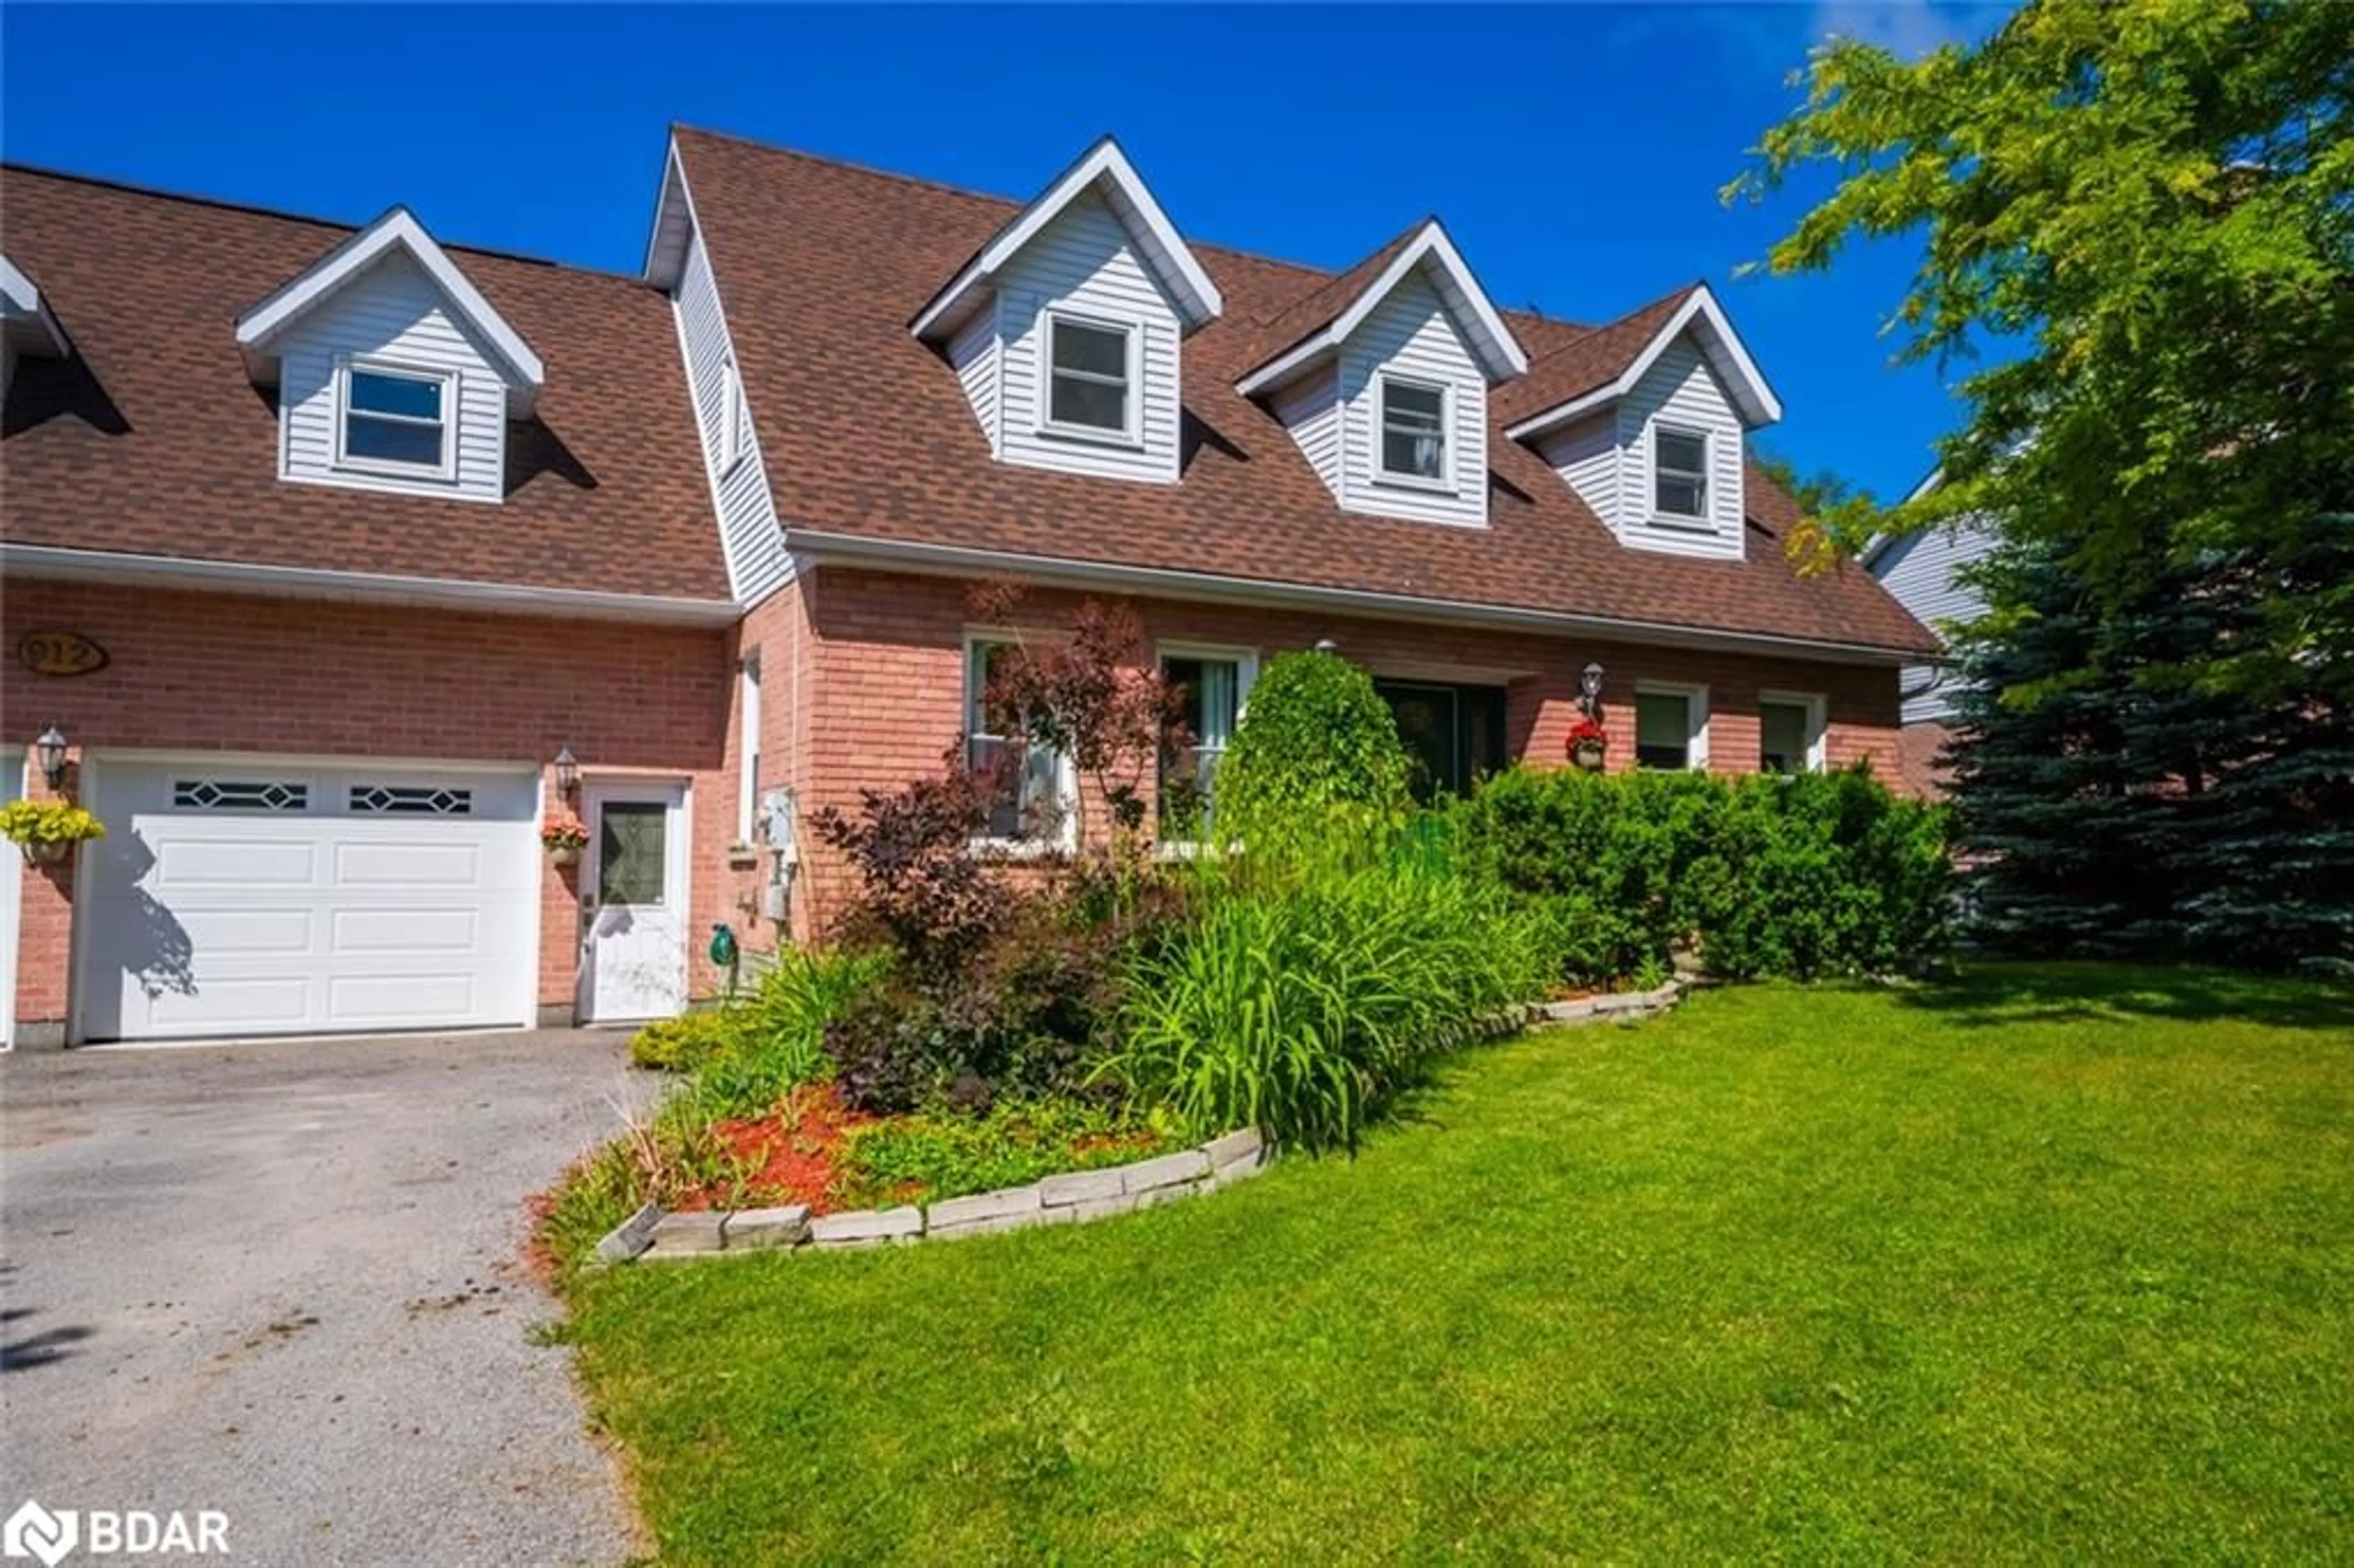 Frontside or backside of a home for 912 Sloan Circle Dr, Innisfil Ontario L0L 1K0